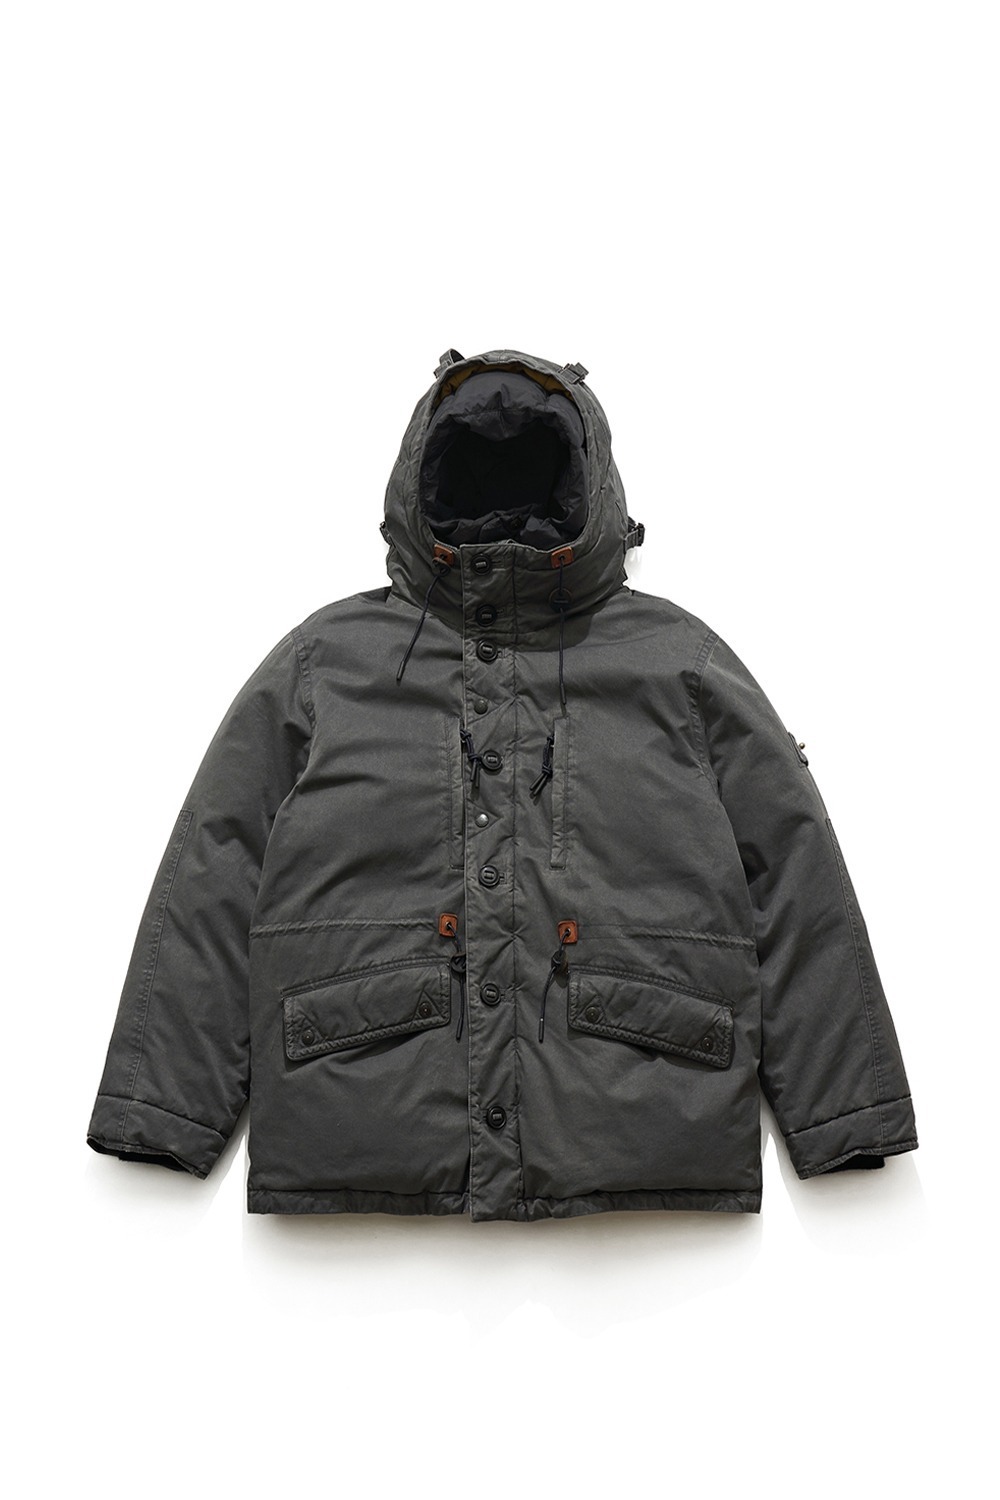 [EASTLOGUE X SERIES] FOUL WEATHER DOWN PARKA / CHARCOAL